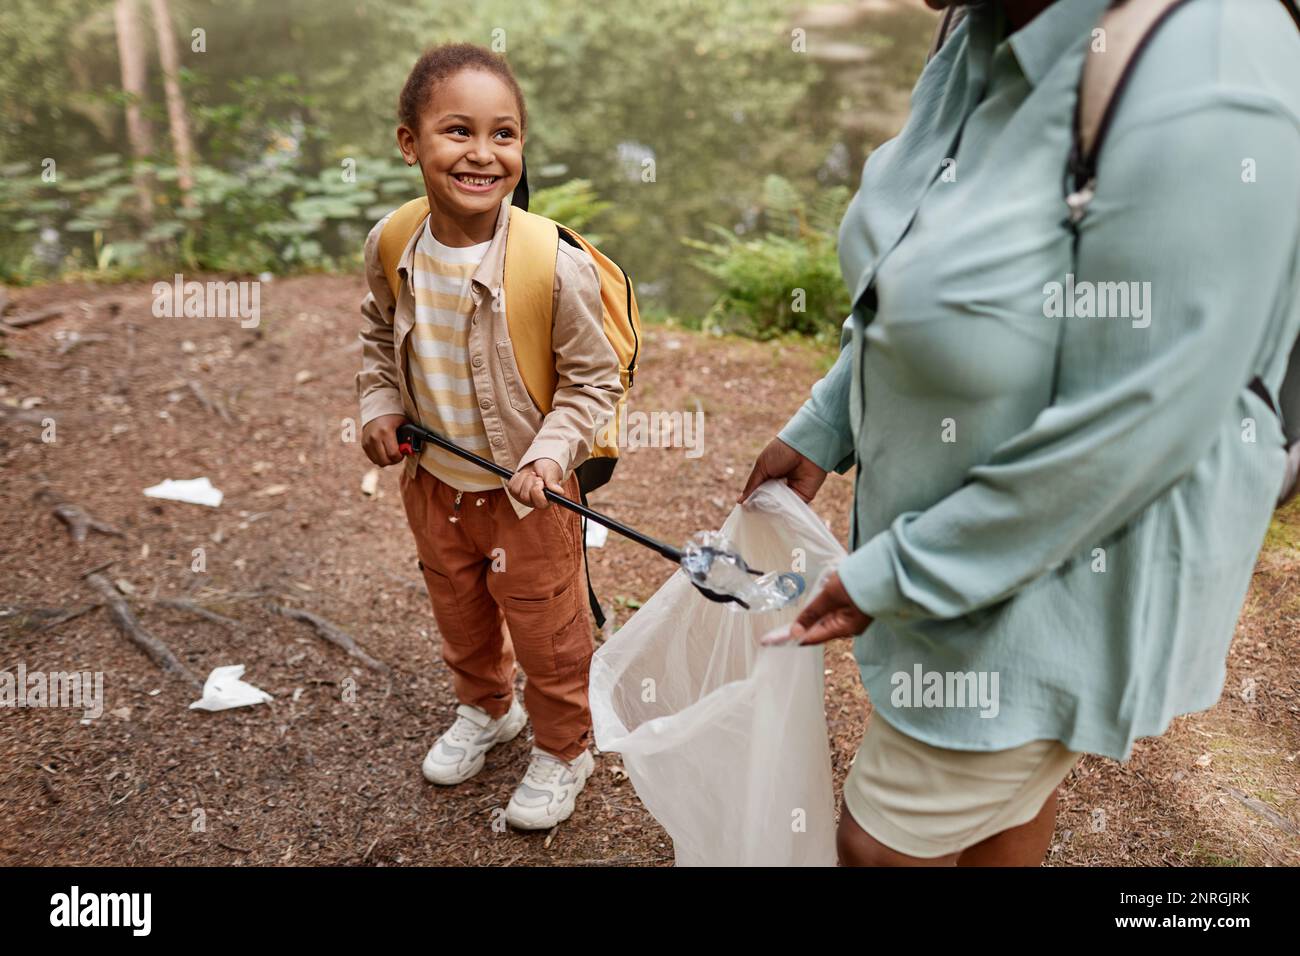 High angle portrait of smiling black girl helping clean nature and picking up plastic bottles outdoors Stock Photo